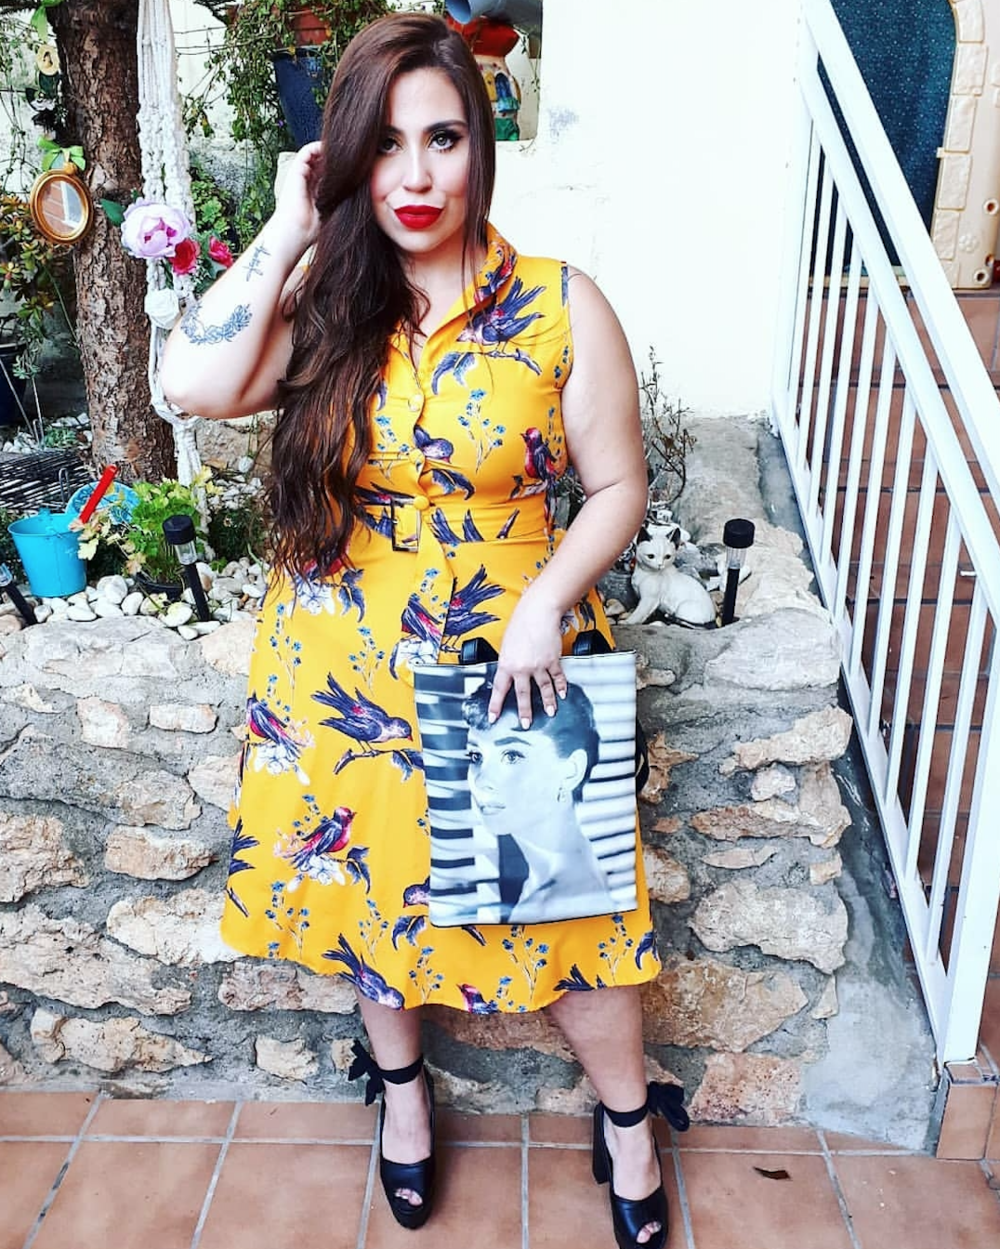 Meet some Plus Size bloggers from Cristina Bonilla — VOL•UP•2